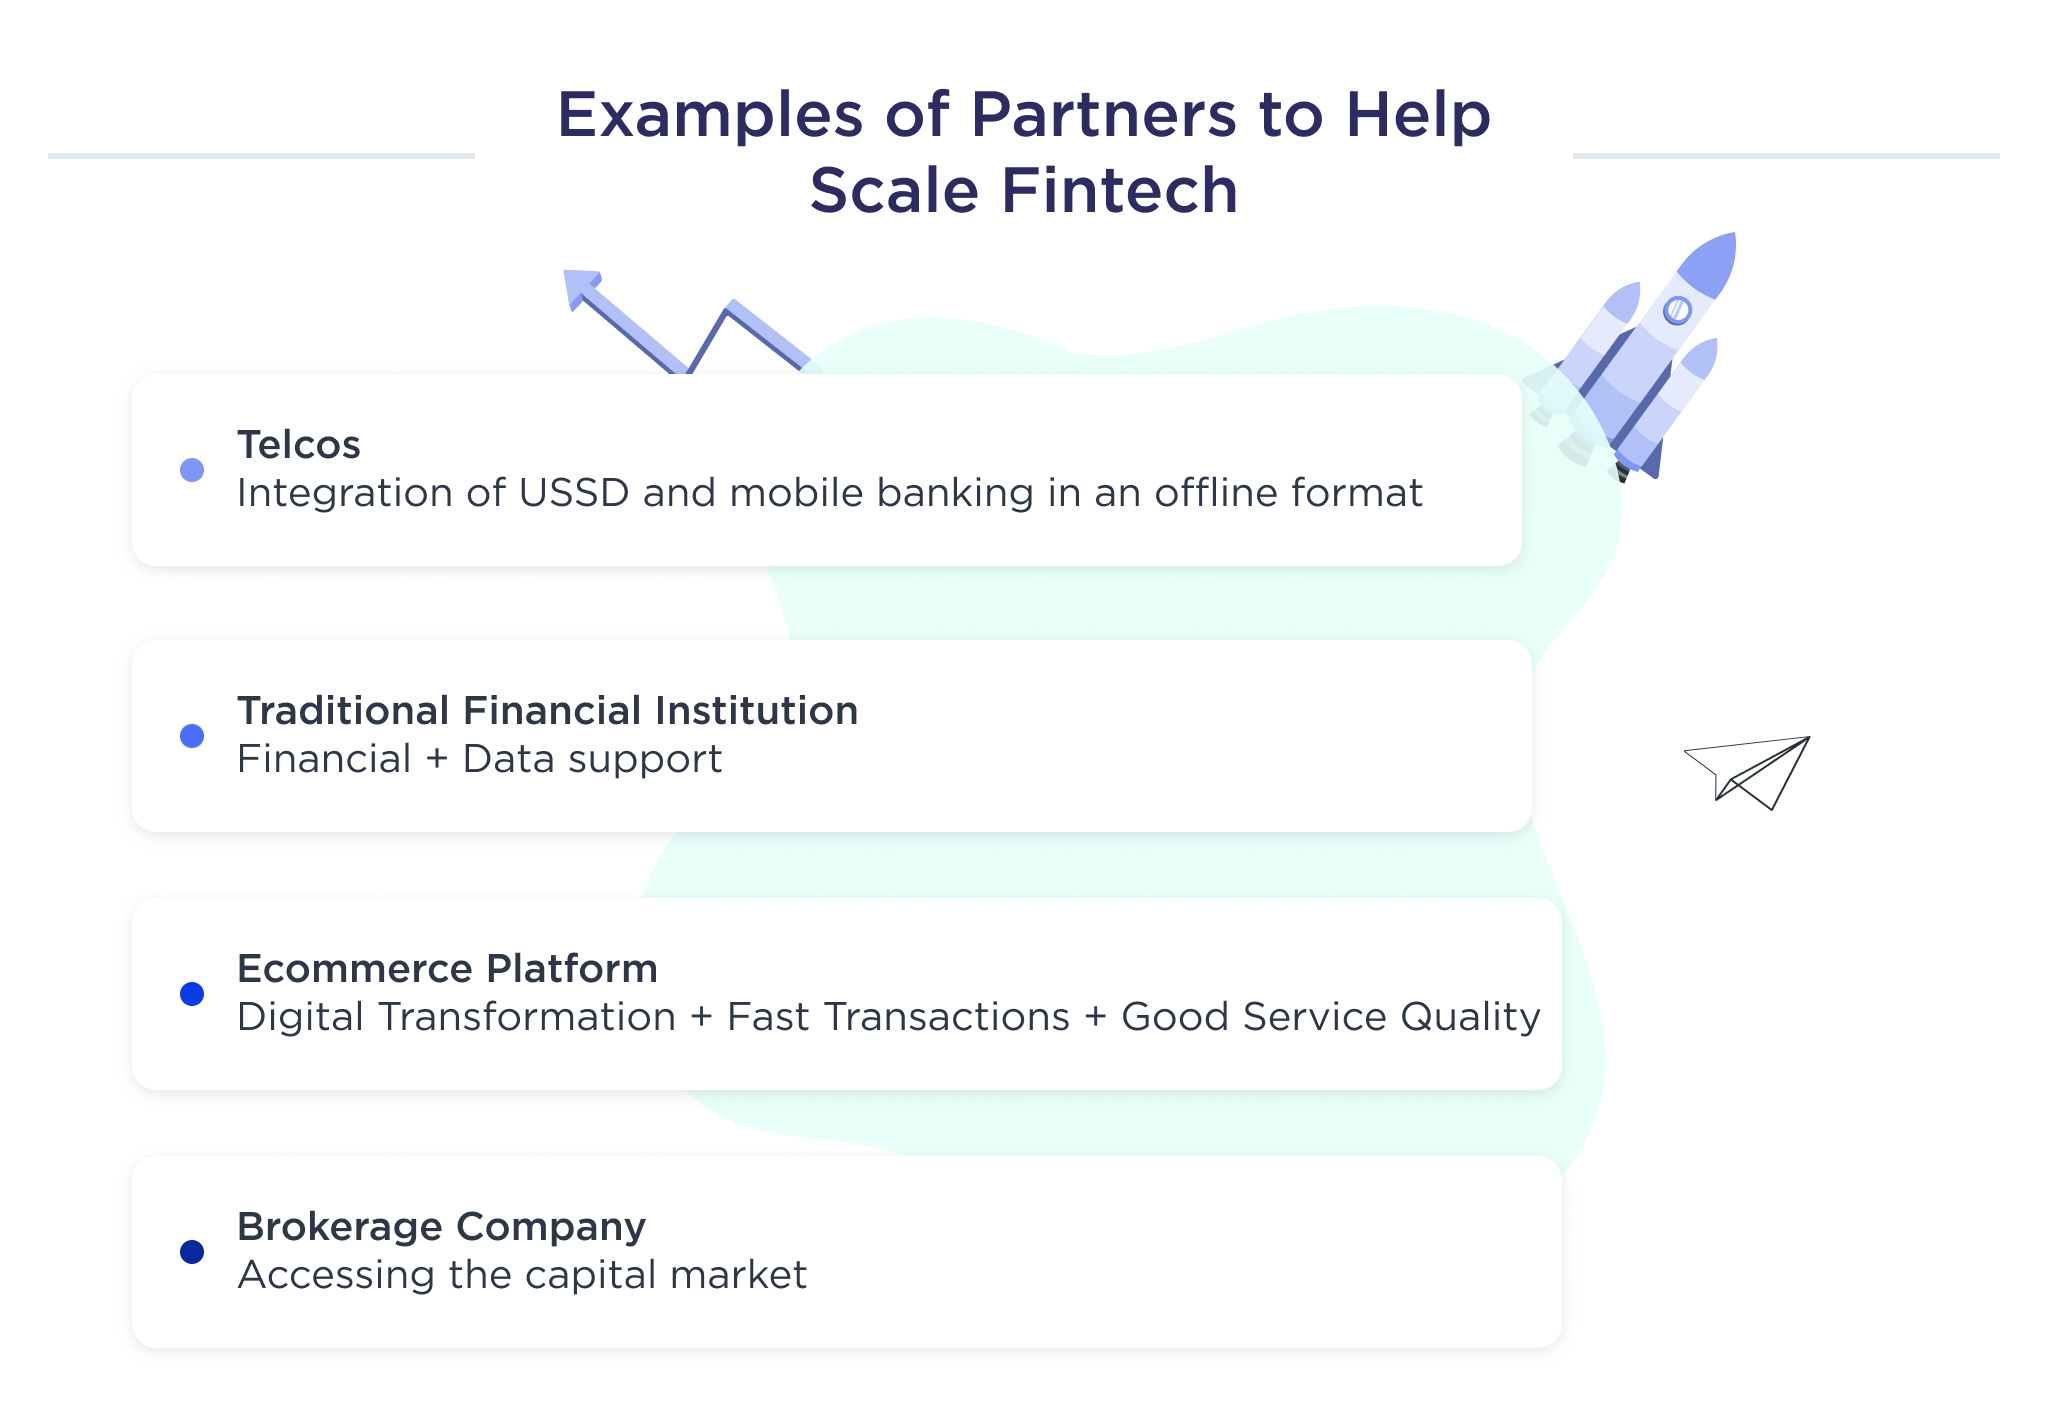 The illustration shows examples of partners to focus on when scaling FinTech